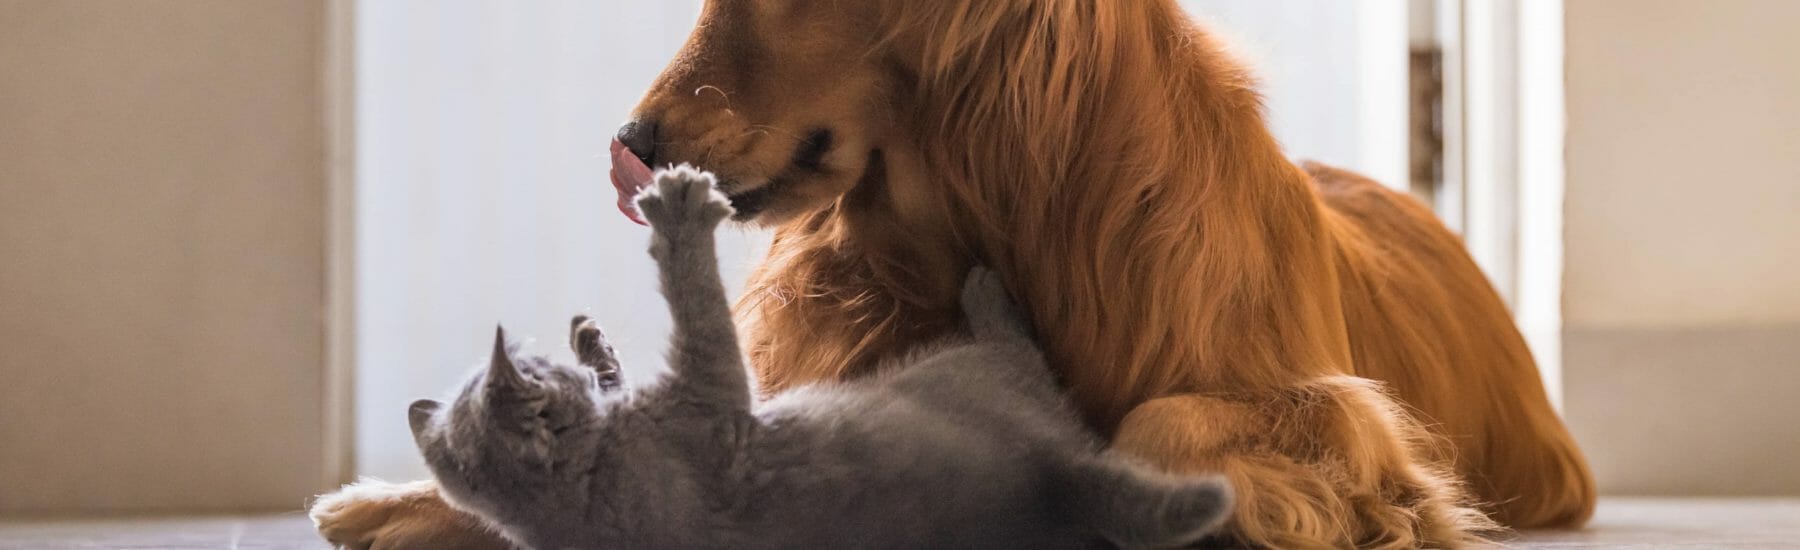 Grey cat and long haired golden dog playing together